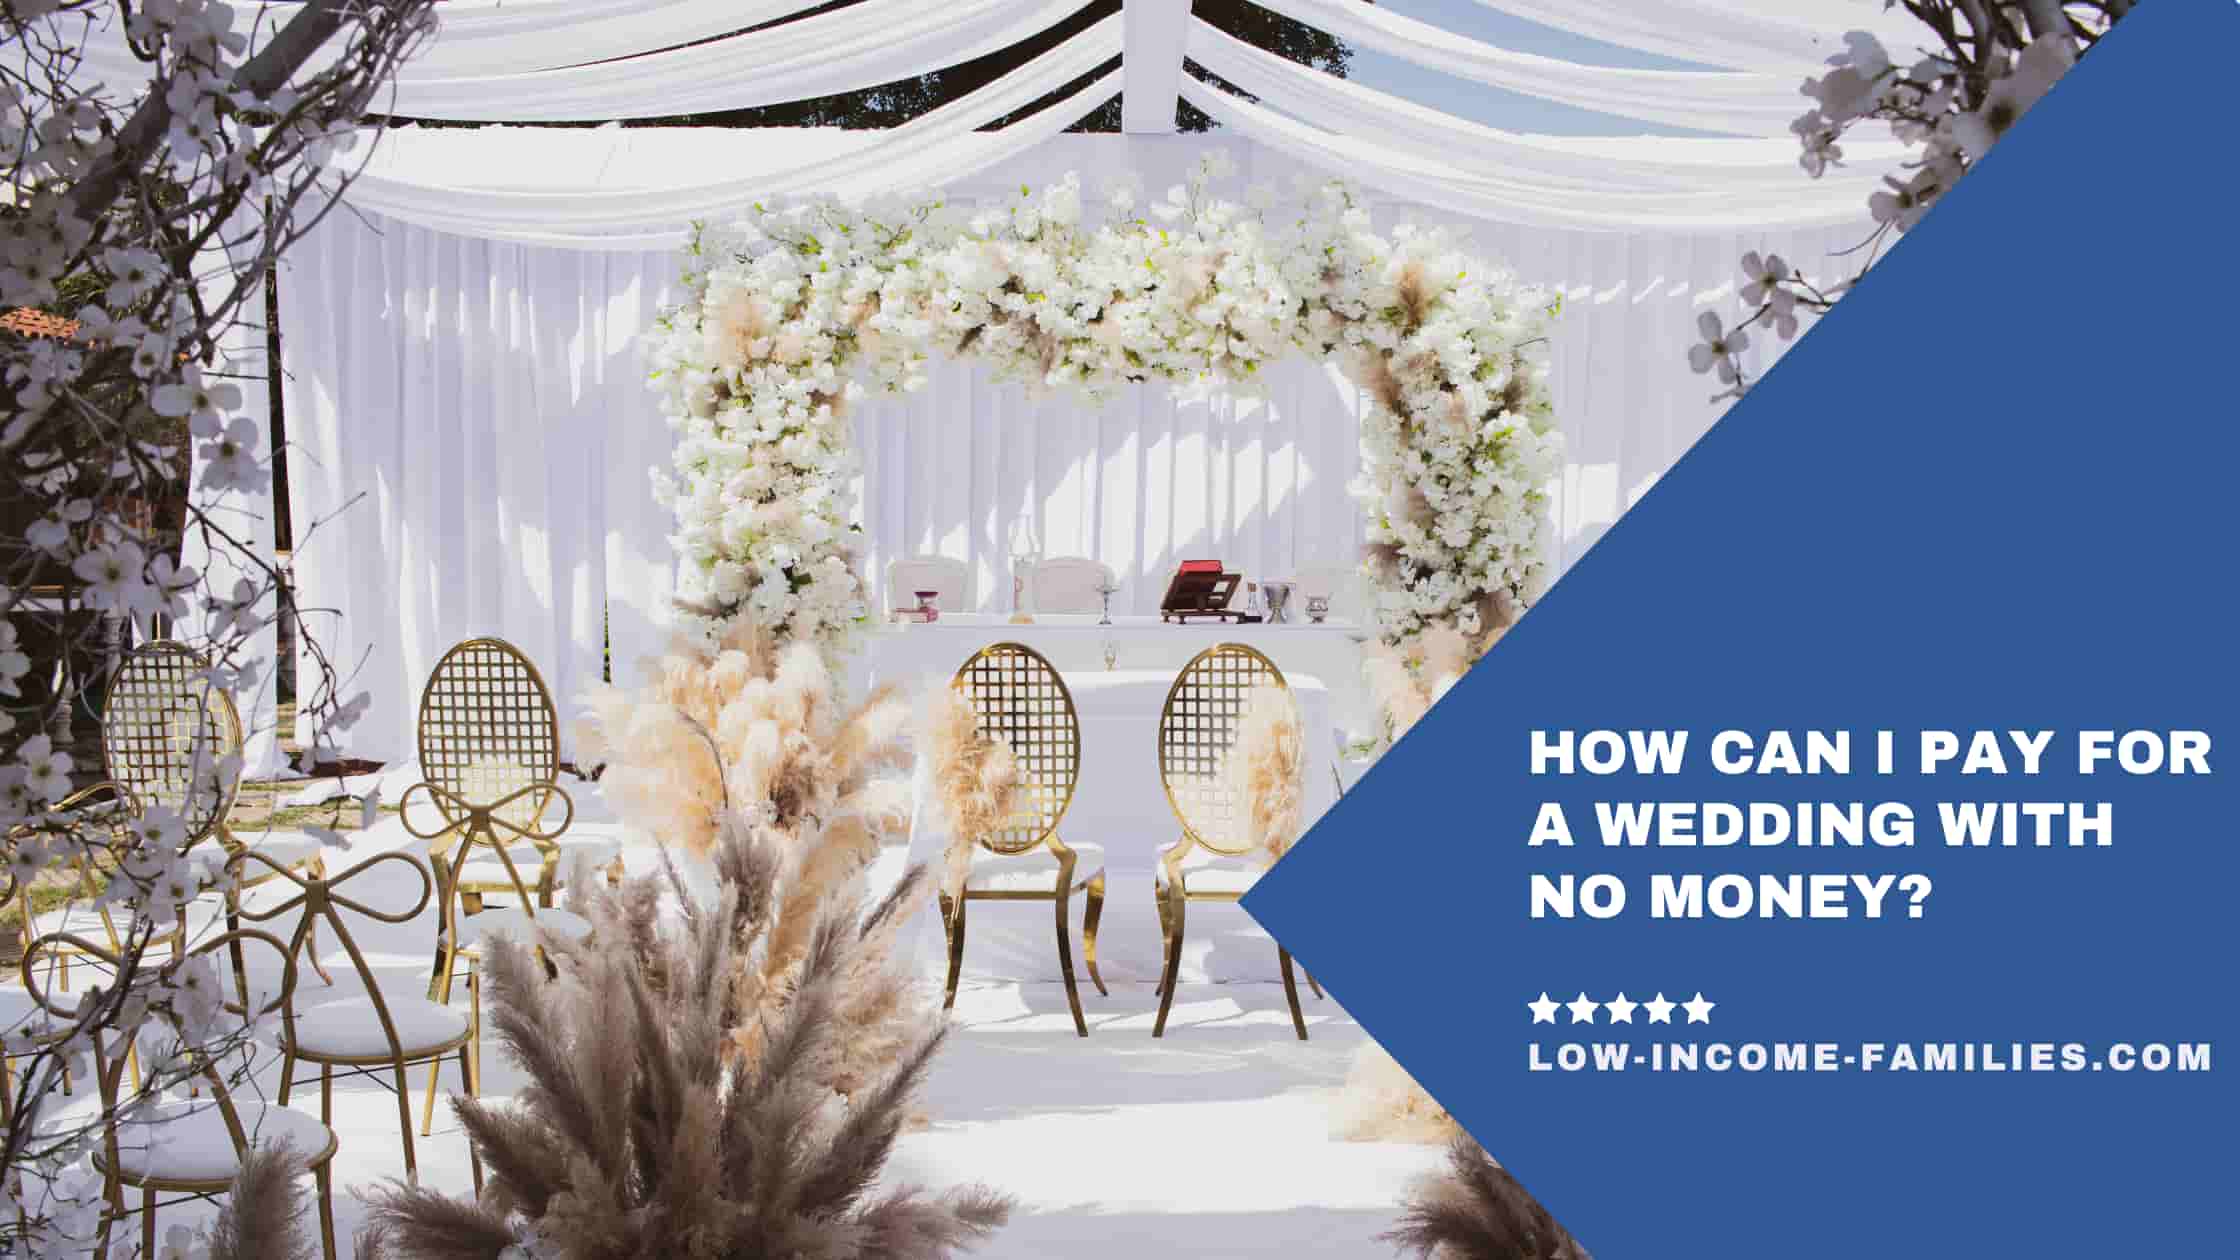 How Can I Pay for a Wedding with No Money?